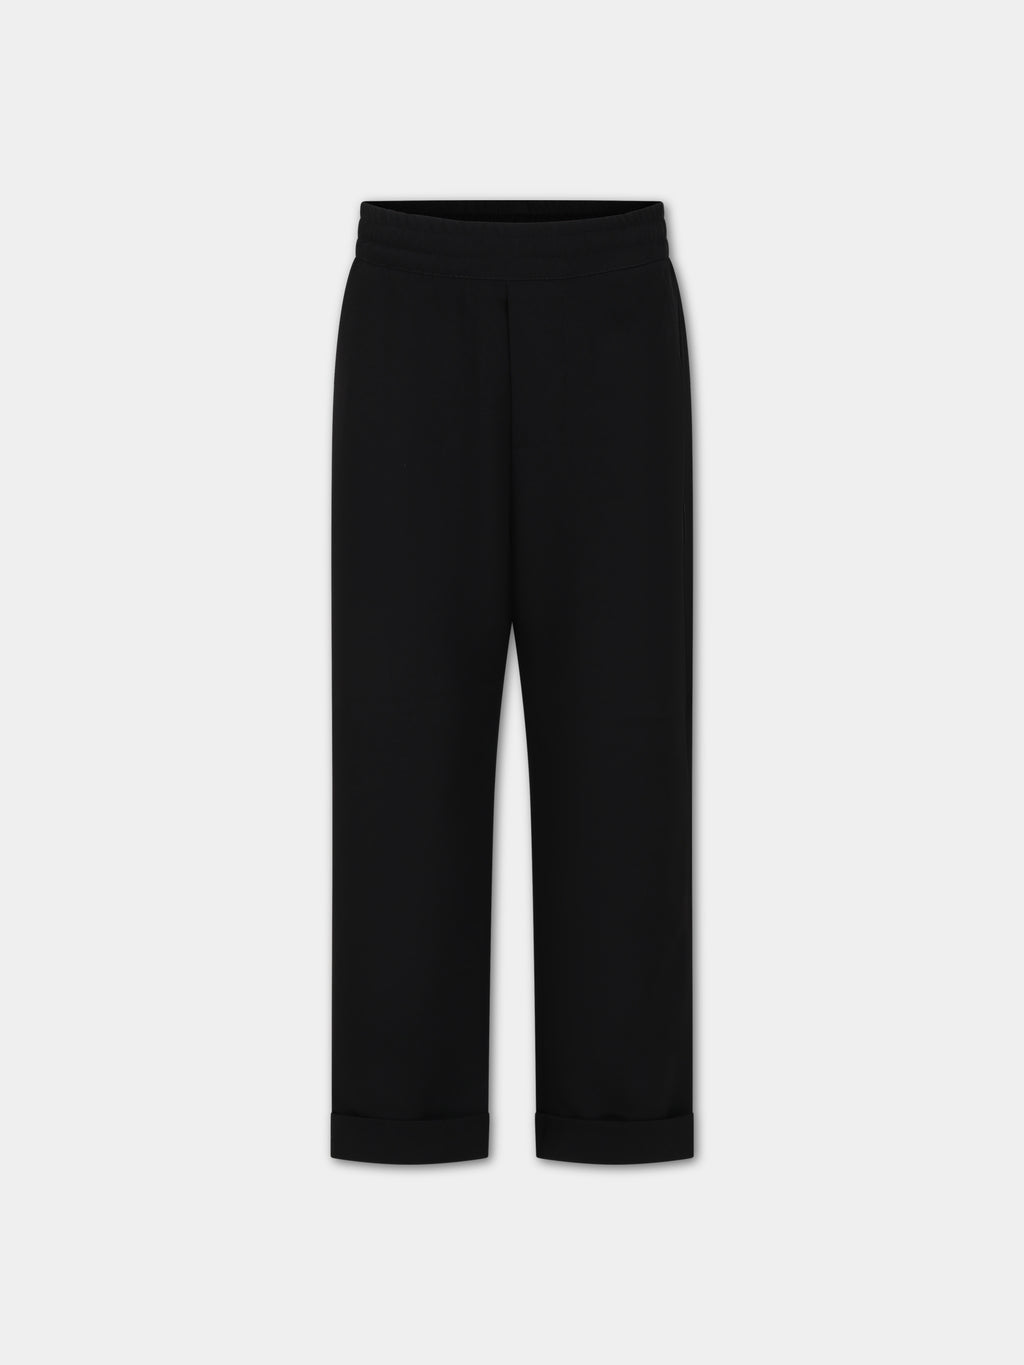 Black trousers fro boy with logo